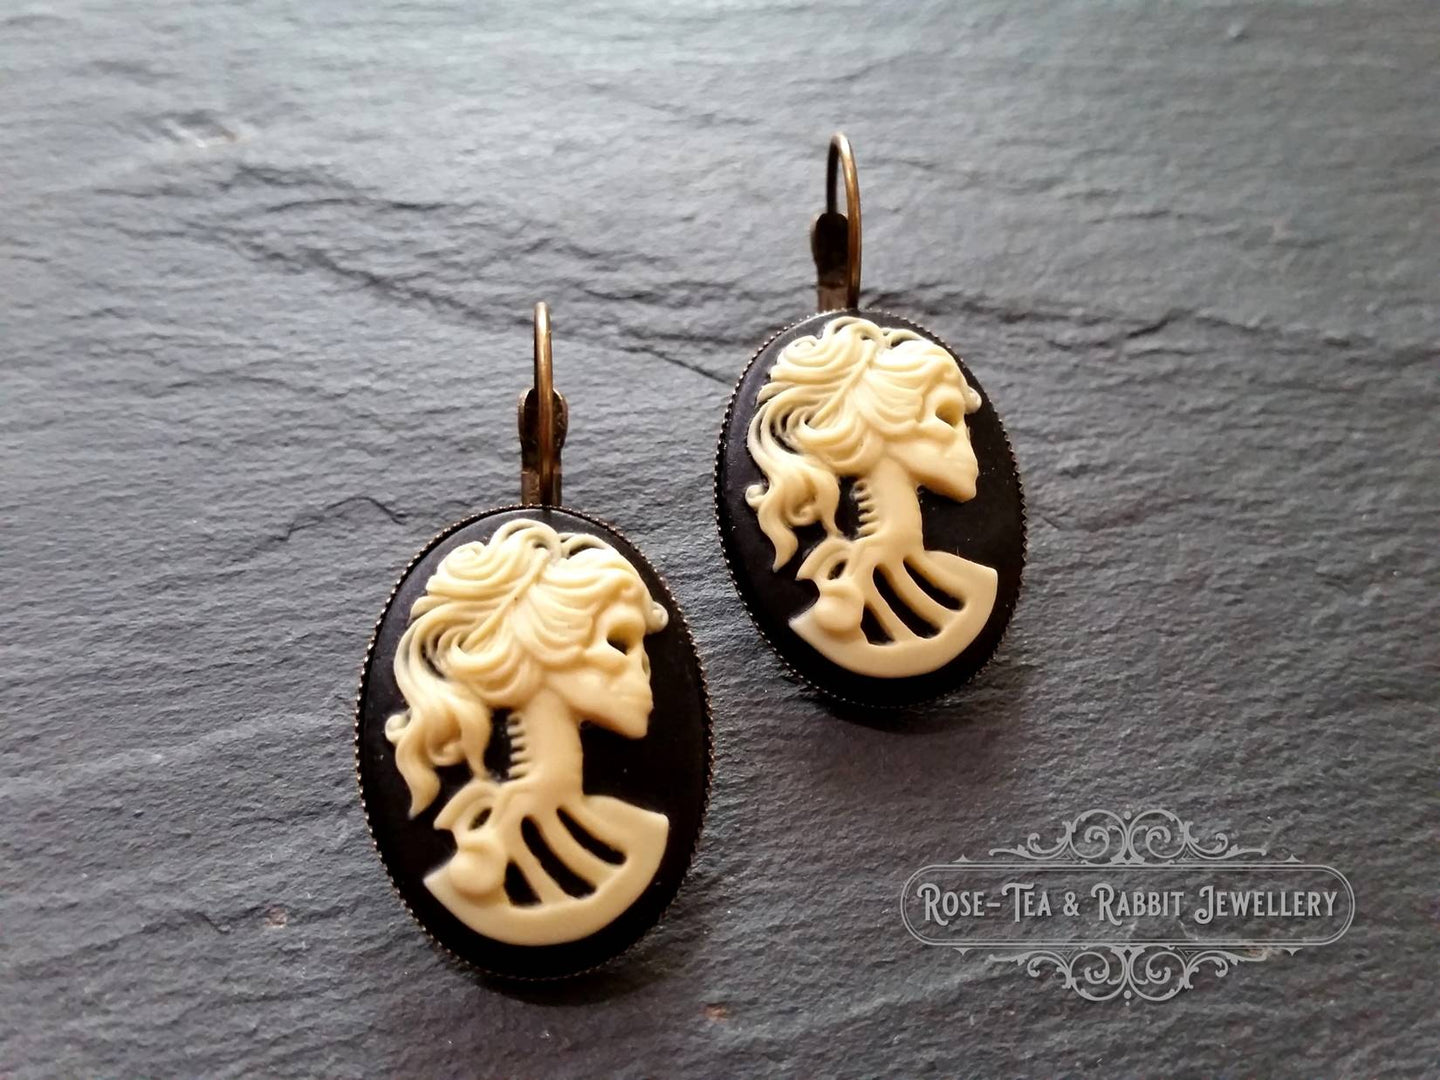 Skeleton Lady Cameo Drop Earrings - 3.7x1.9cm(1.45 x 0.74 Inches) - Black and Ivory Tones - Antiqued Bronze Tone Base - Lever Back Closure